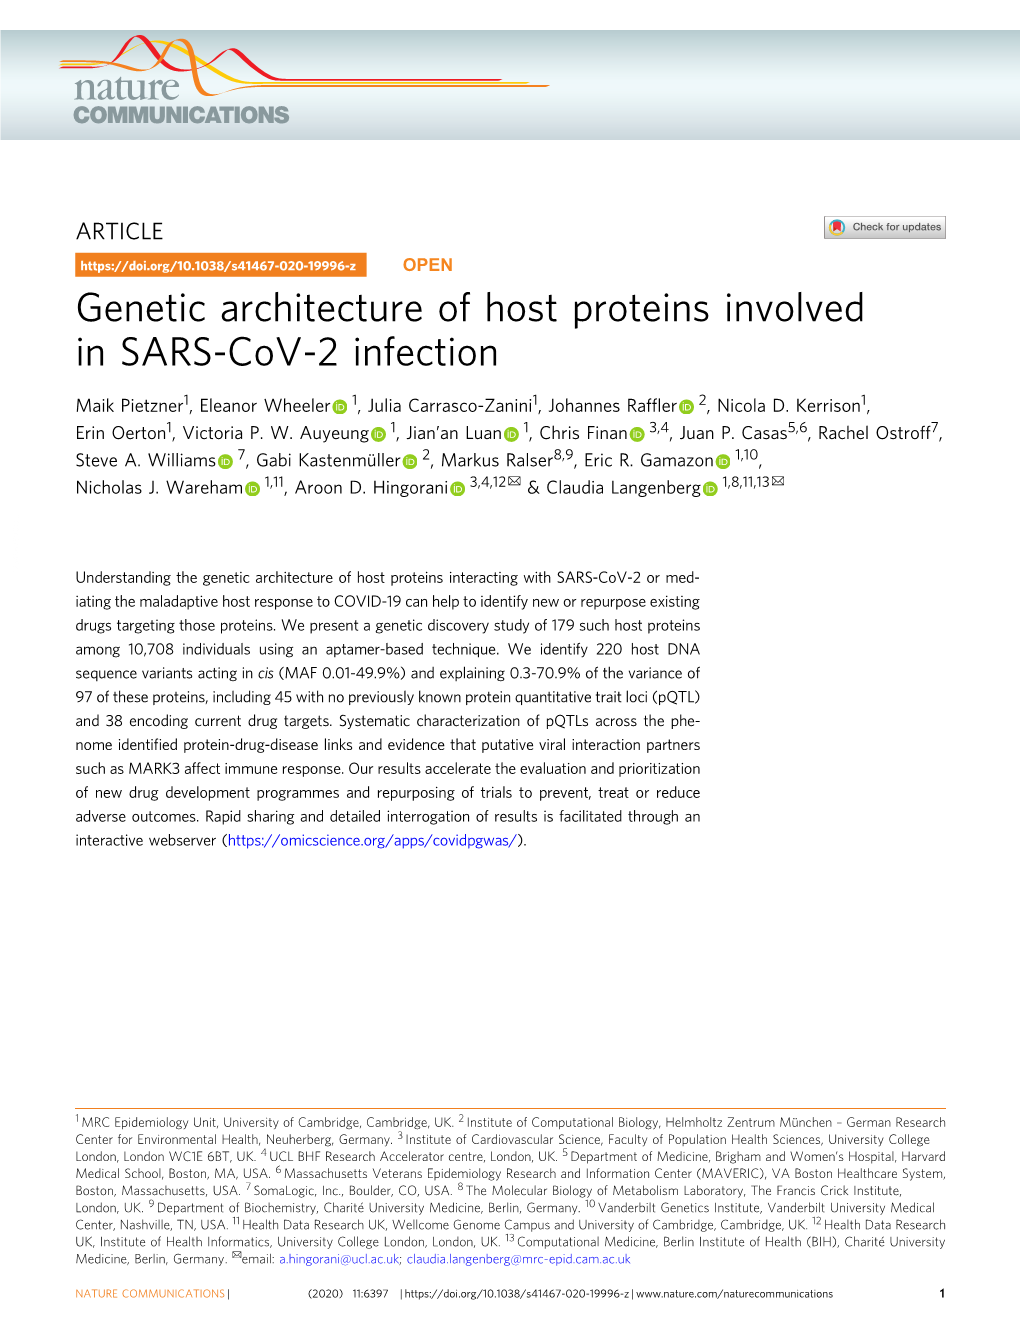 Genetic Architecture of Host Proteins Involved in SARS-Cov-2 Infection